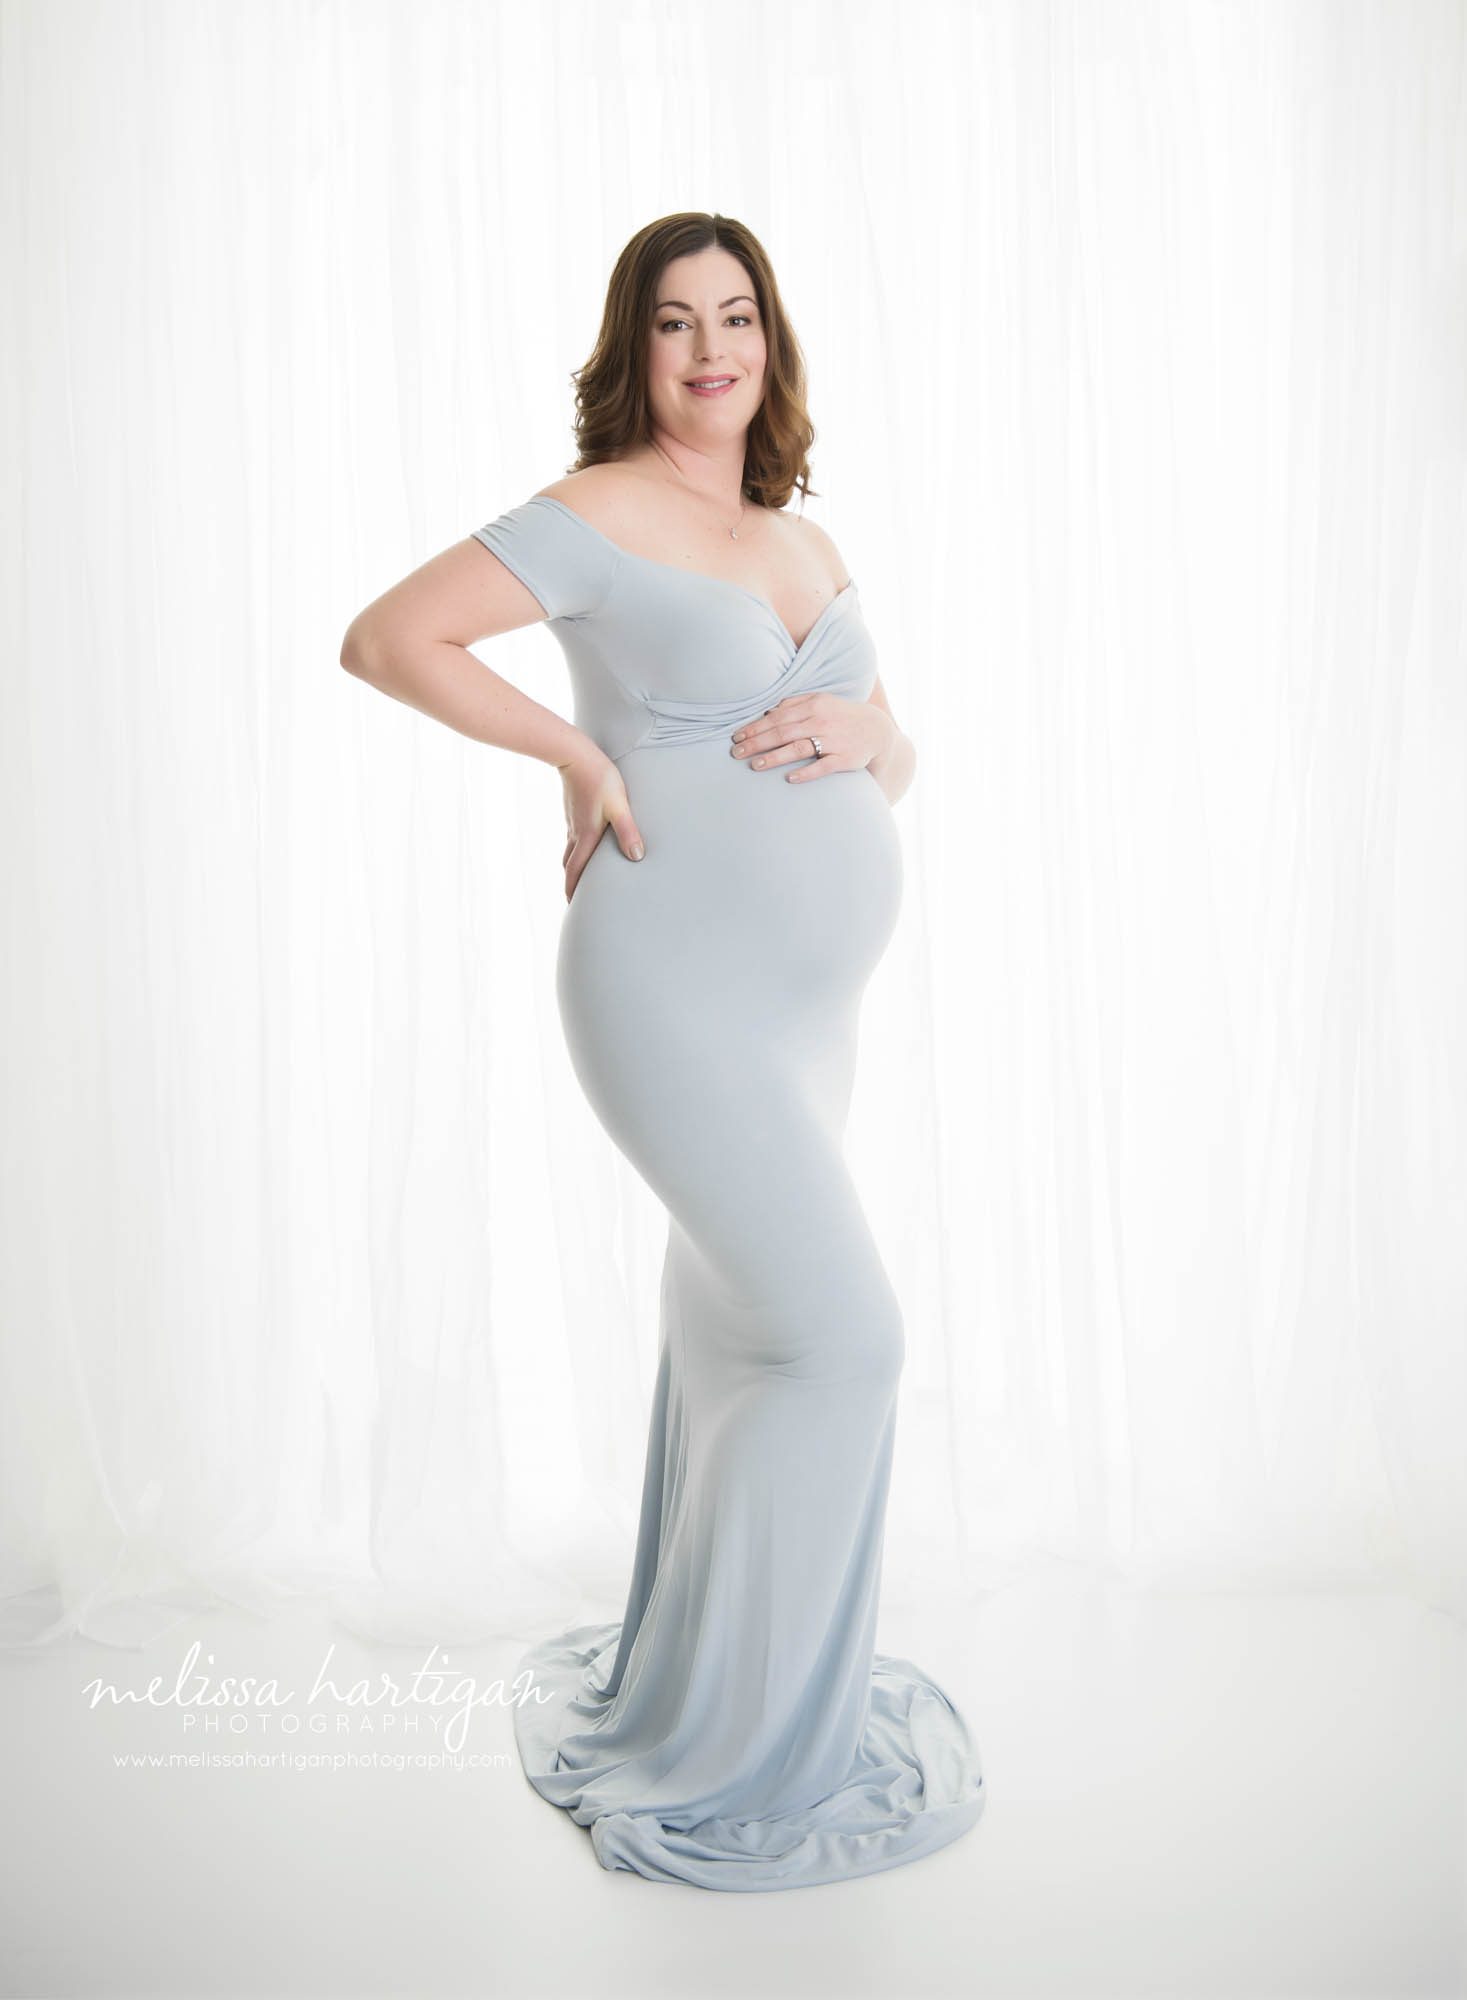 pregnant mom standing maternity pose looking at camera smiling one hand on baby bump one hand on back Tolland Maternity Photographer